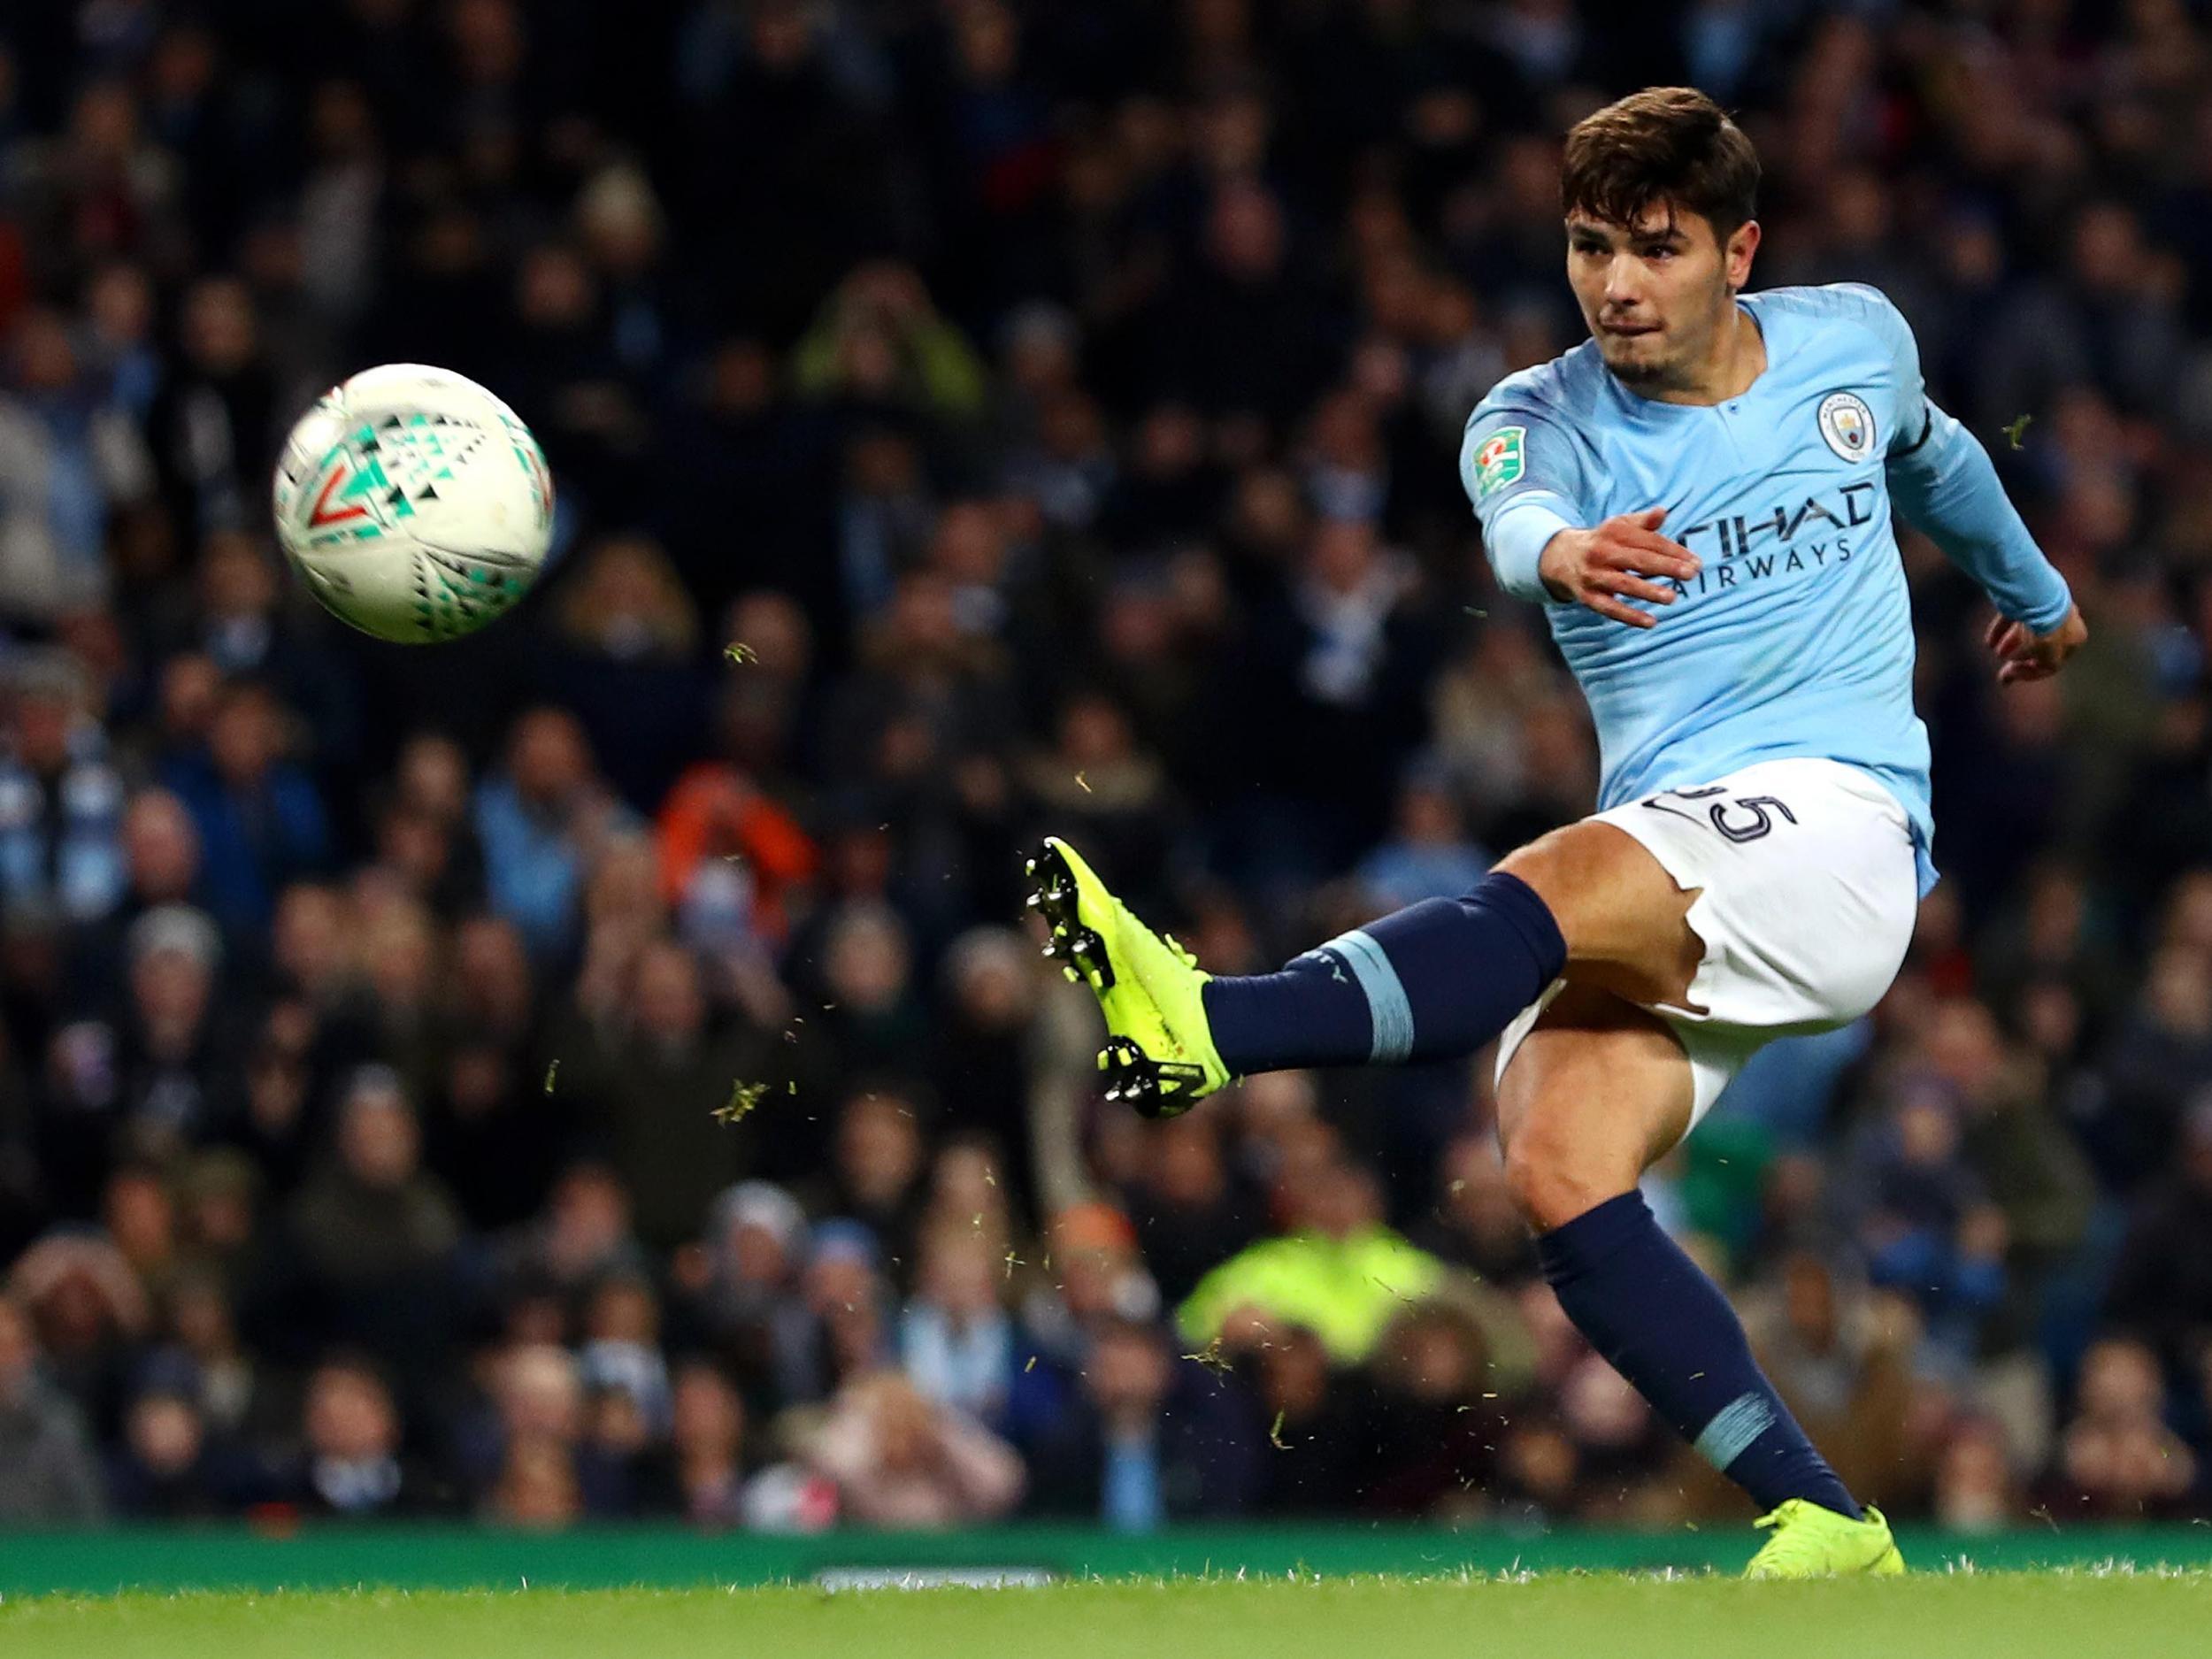 Real Madrid announce agreement with Manchester City to sign Brahim